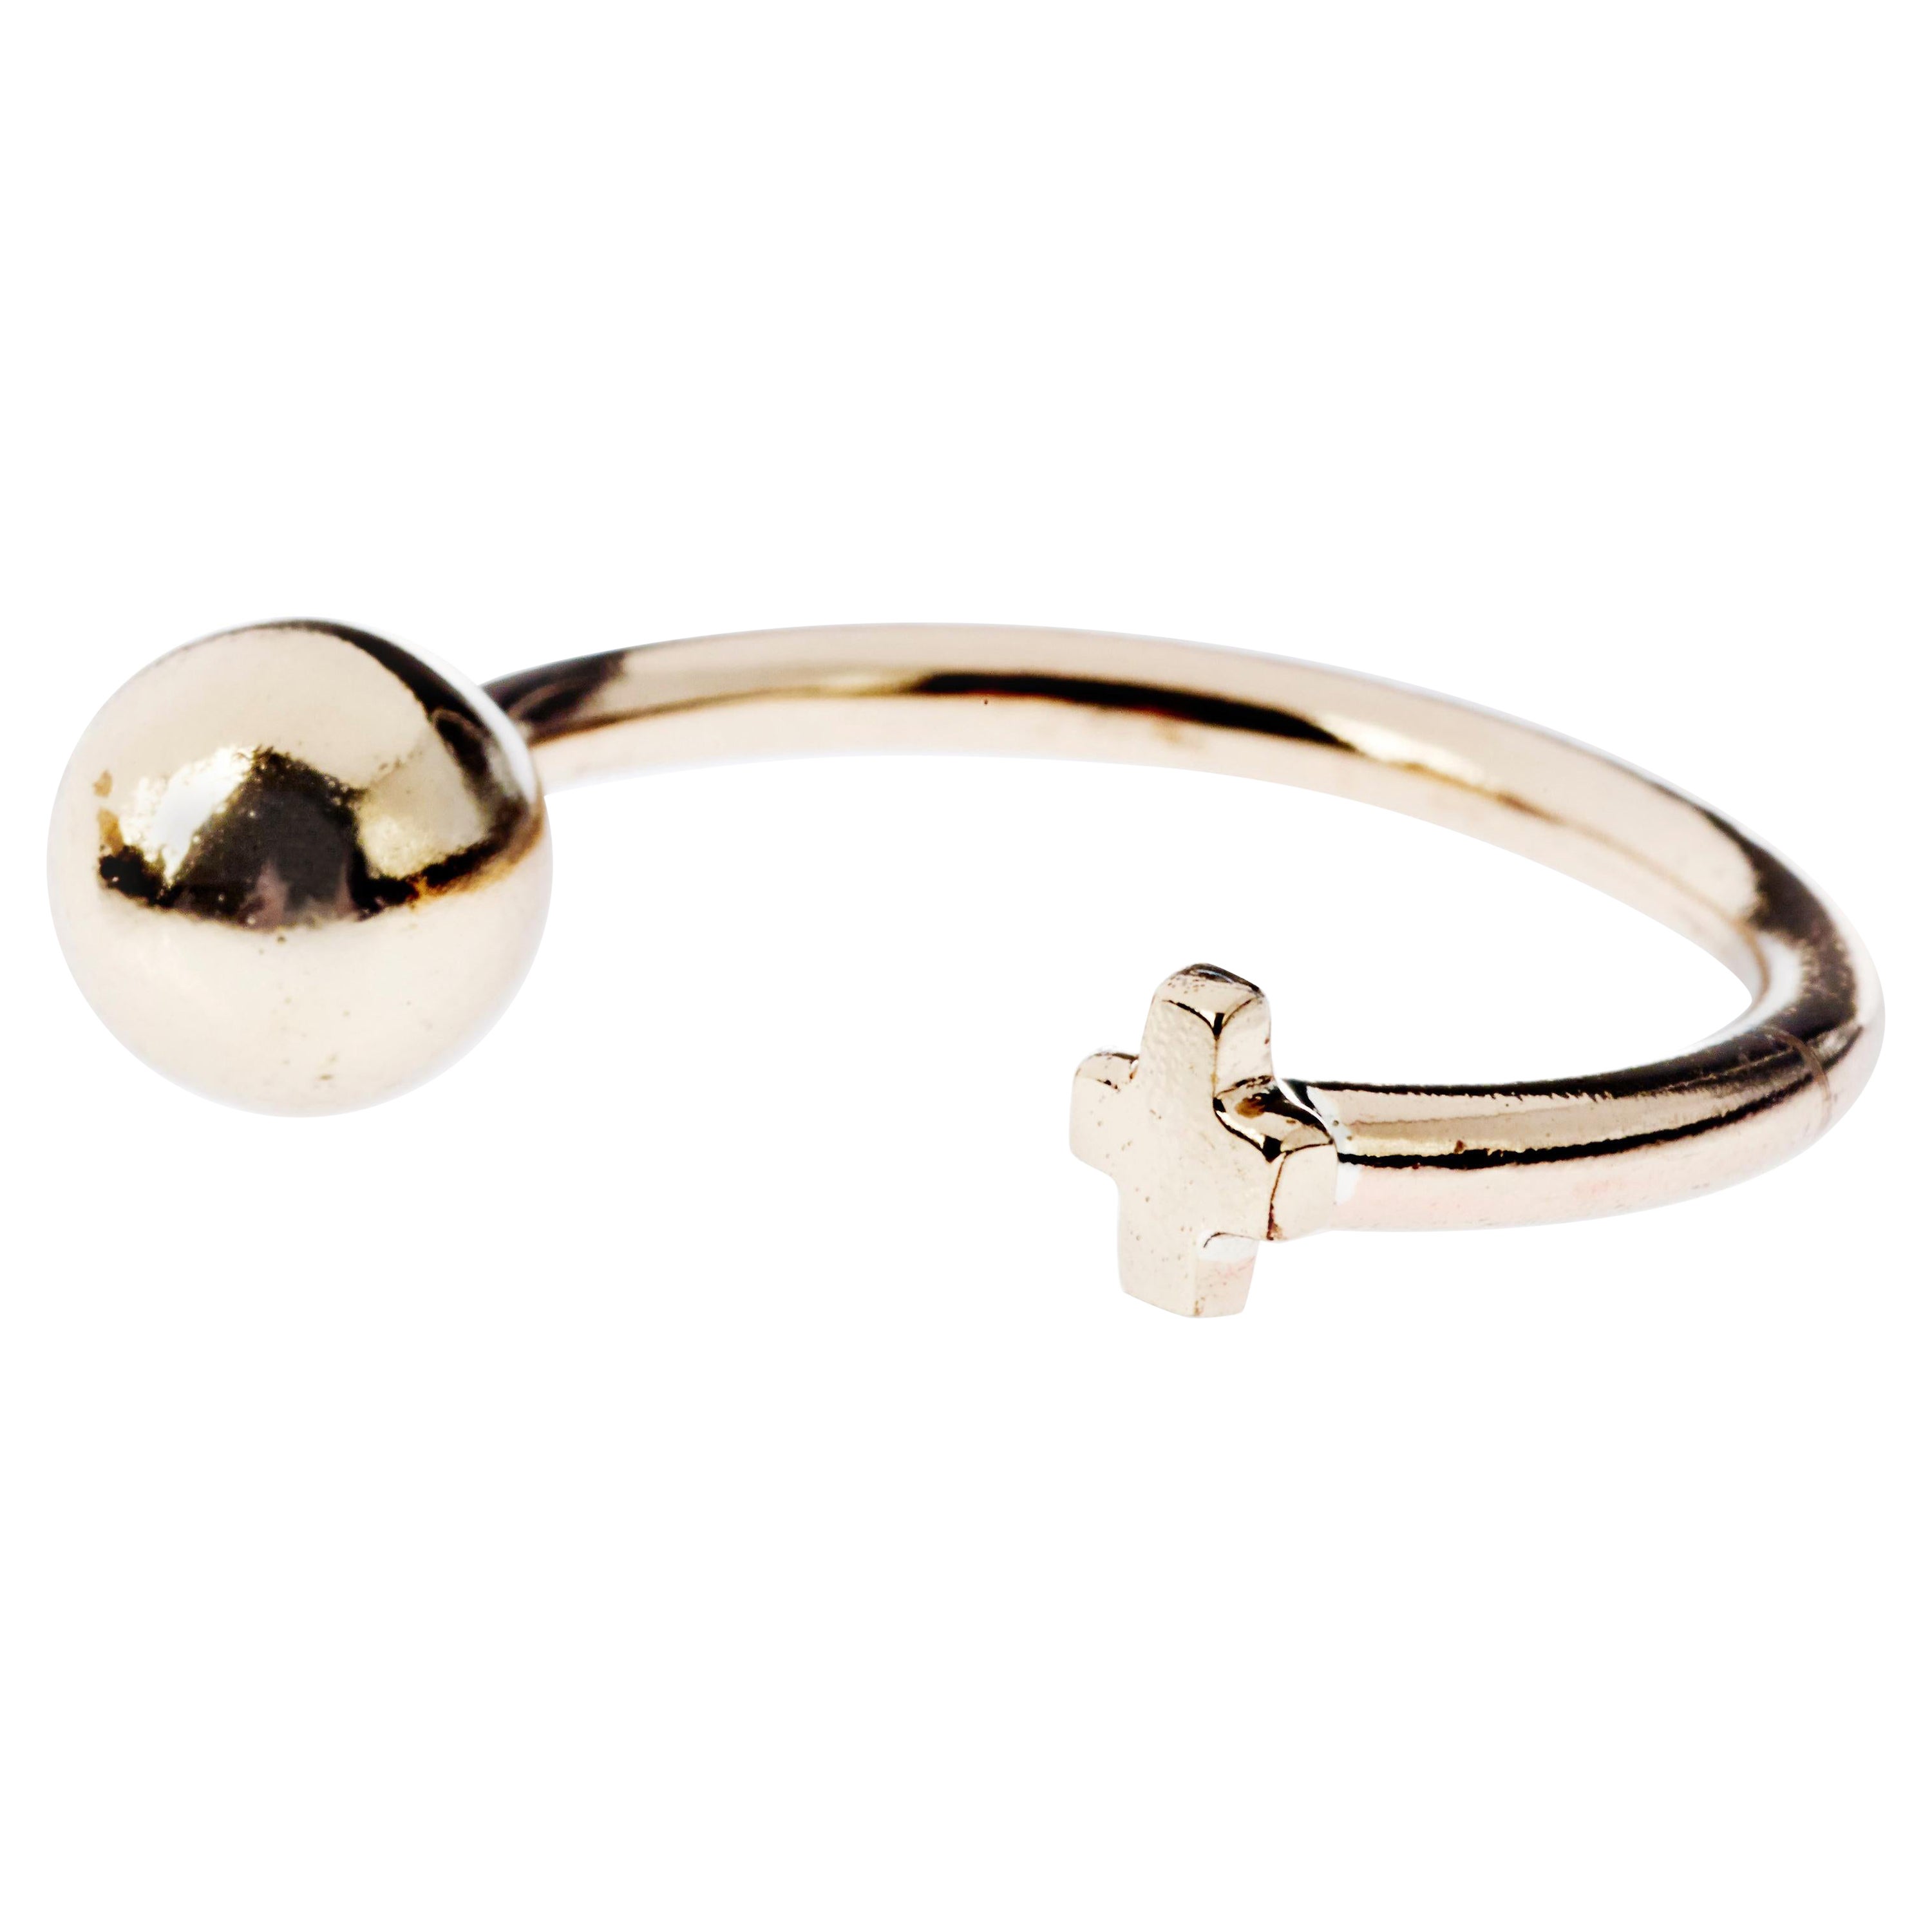 Stack Ring Ball Cross Cocktail Ring Gold Adjustable Stackable J Dauphin

J DAUPHIN 